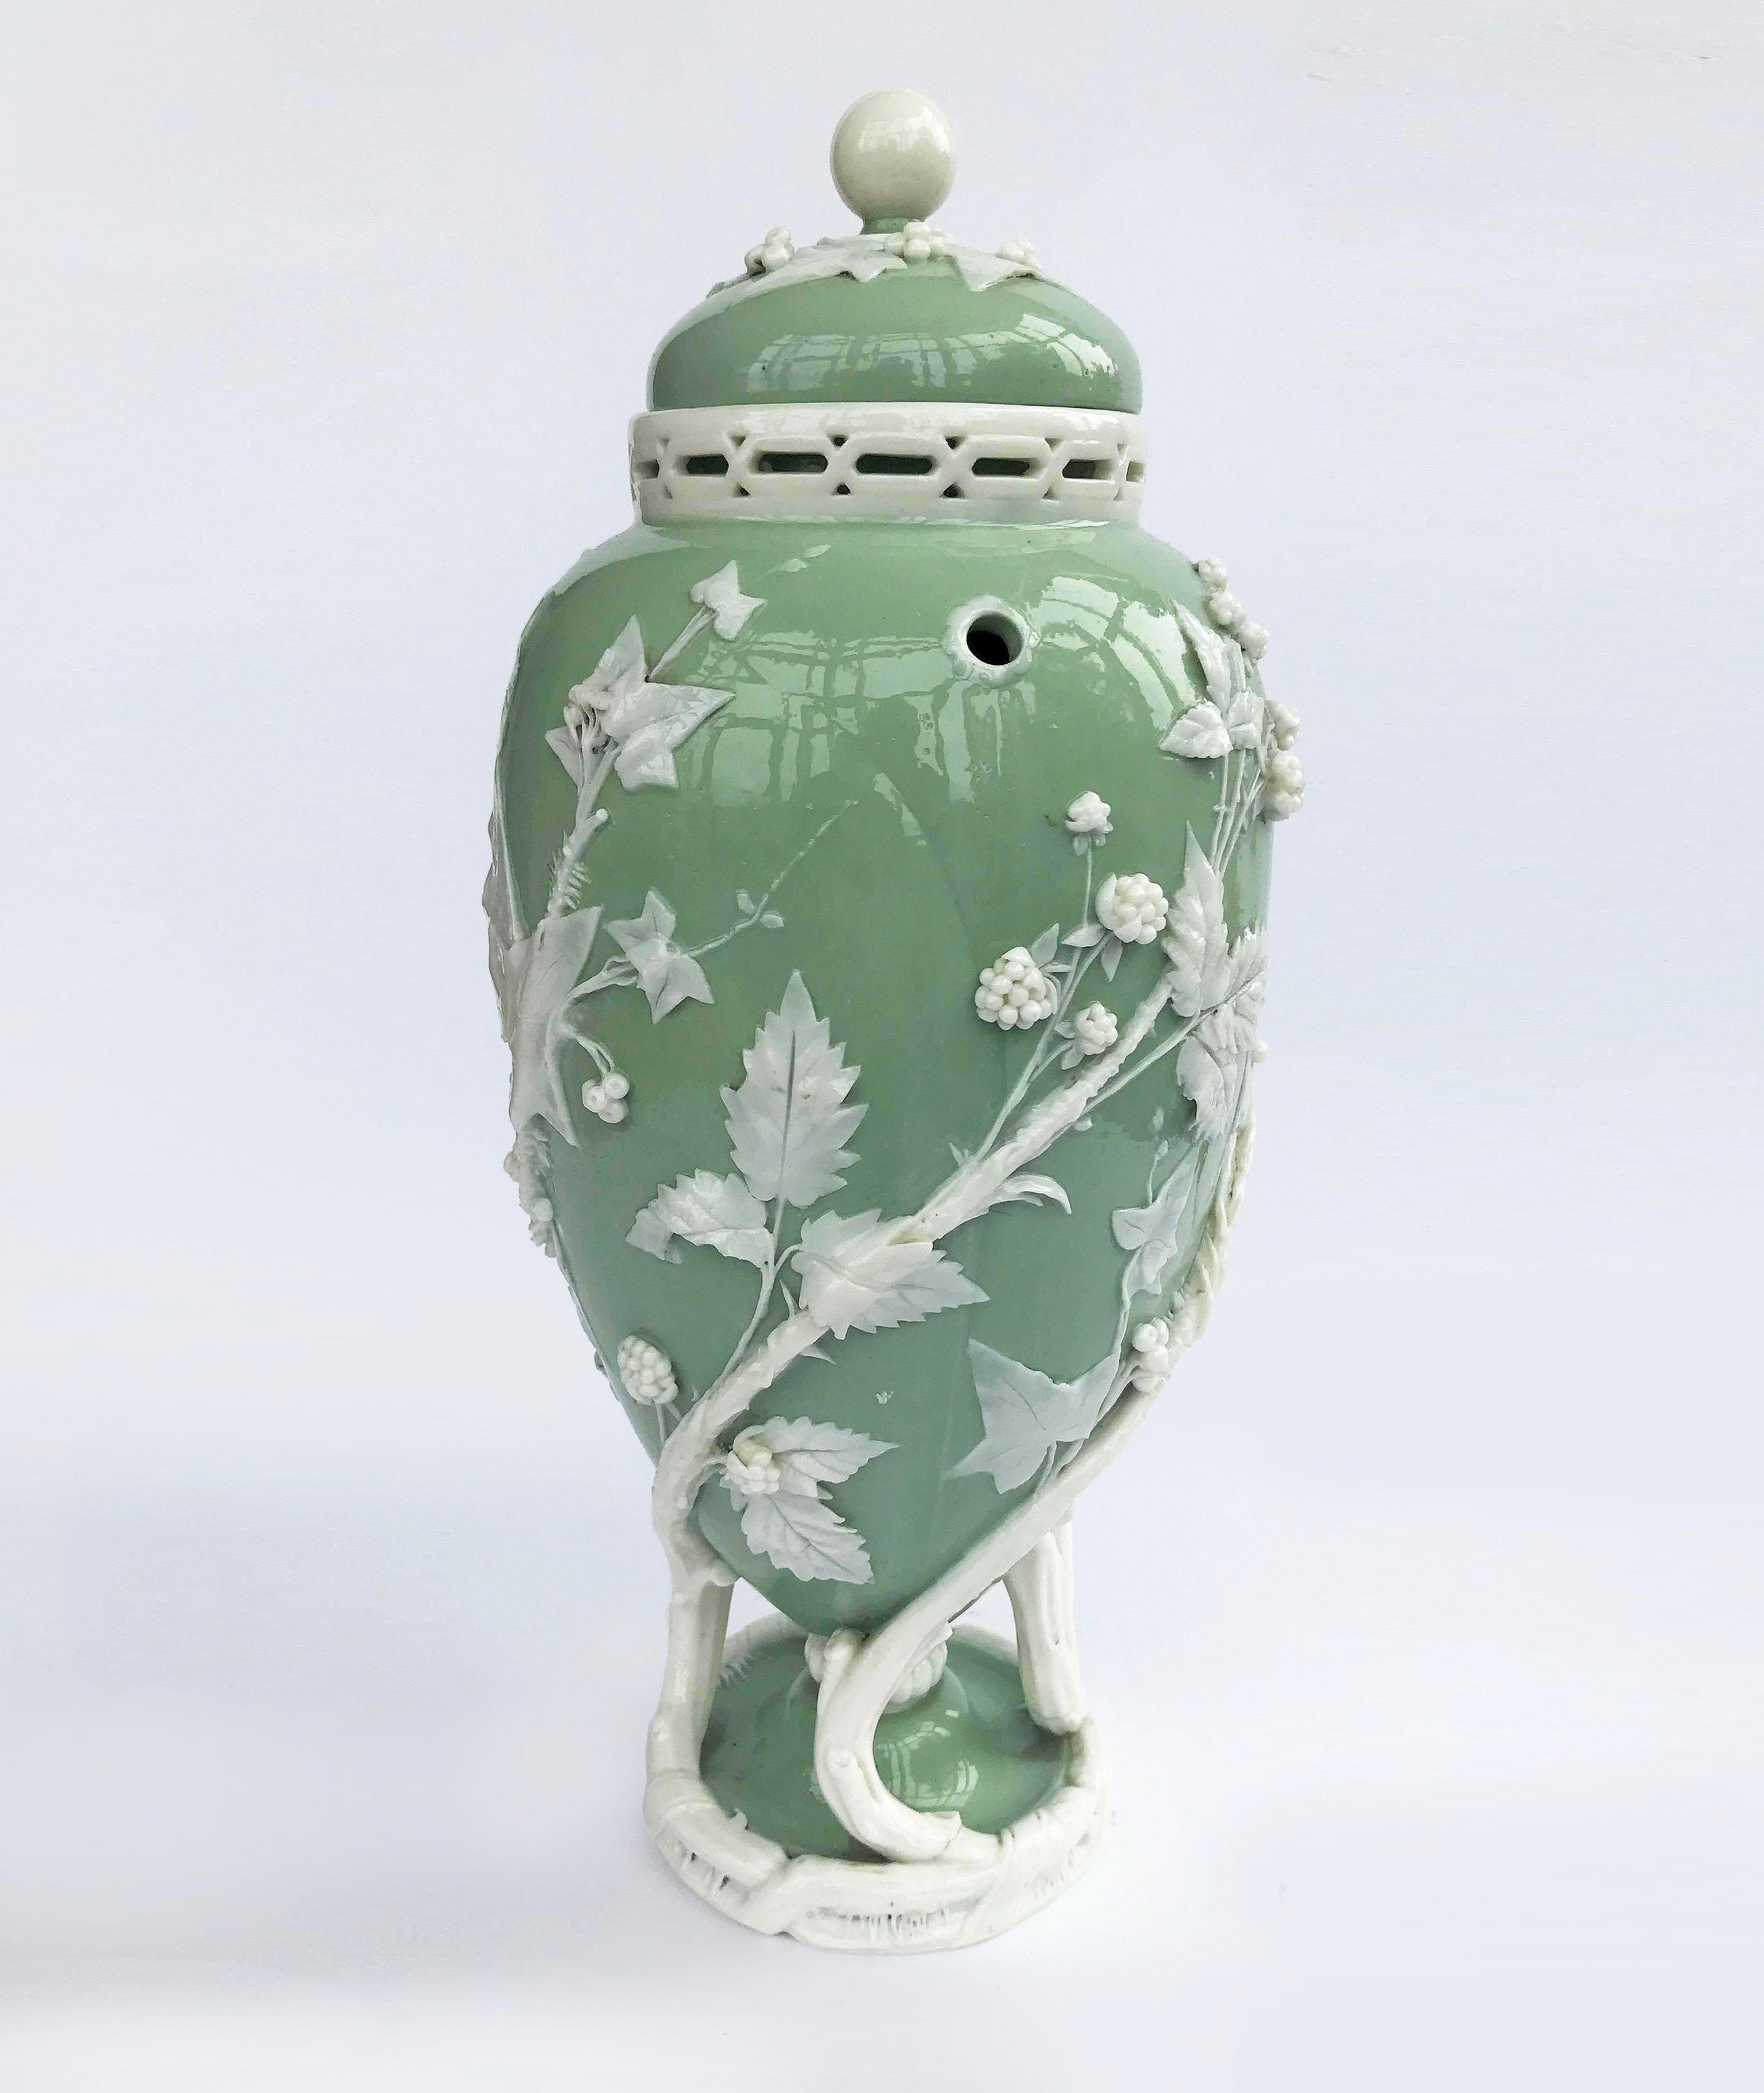 An very rare museum quality Minton Celadon Potpourri, circa 1868.
The celadon body decorated in pate sur pate blackberries, ivy, leaves and branches, the collar pierced, the cover with leaves and a ball knop, all supported on three spiralling